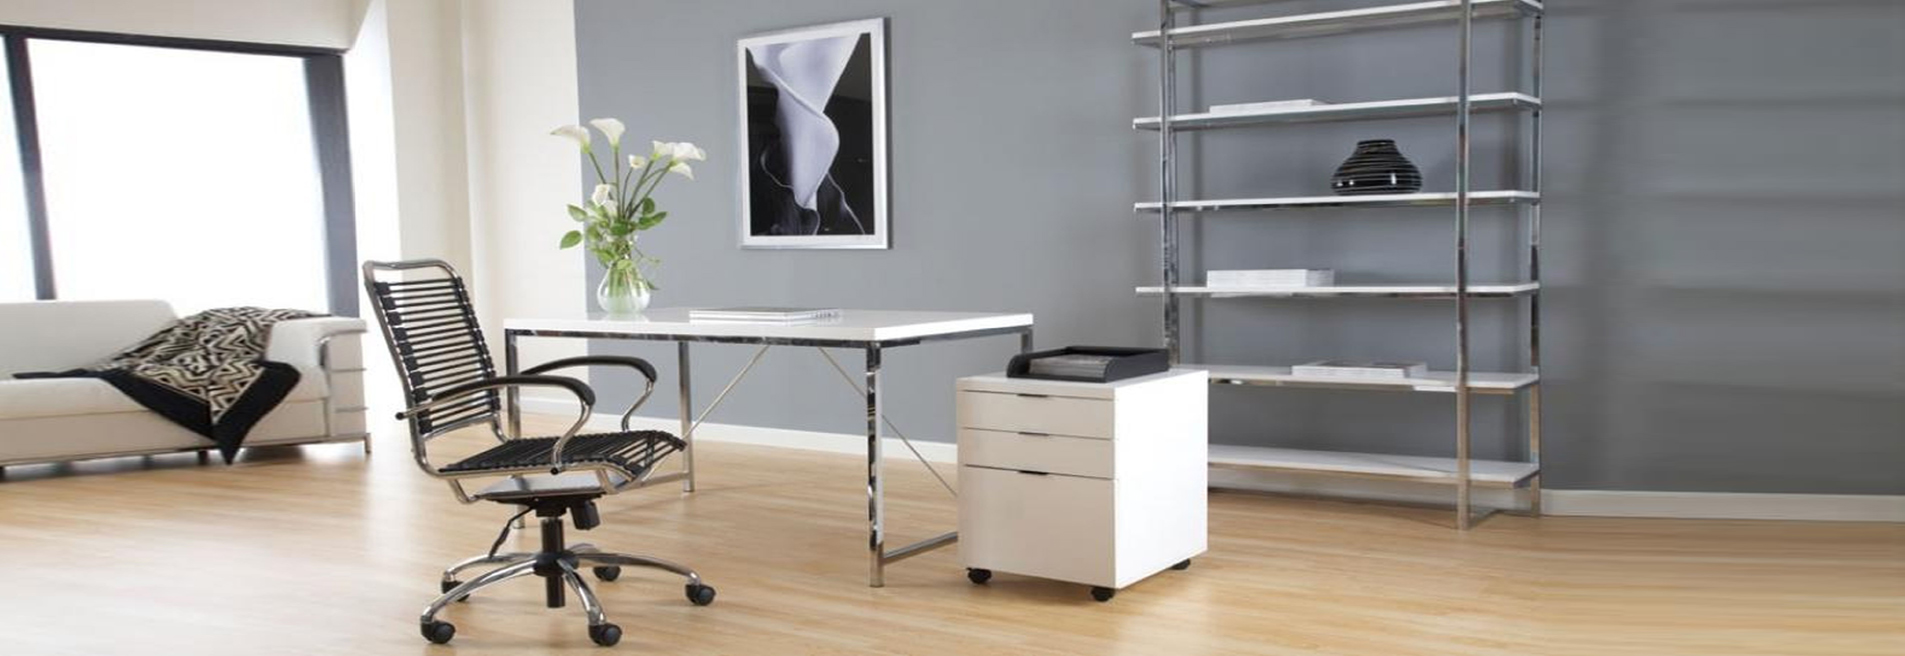 Computer Desk For Small Spaces Space Saving Desk Small